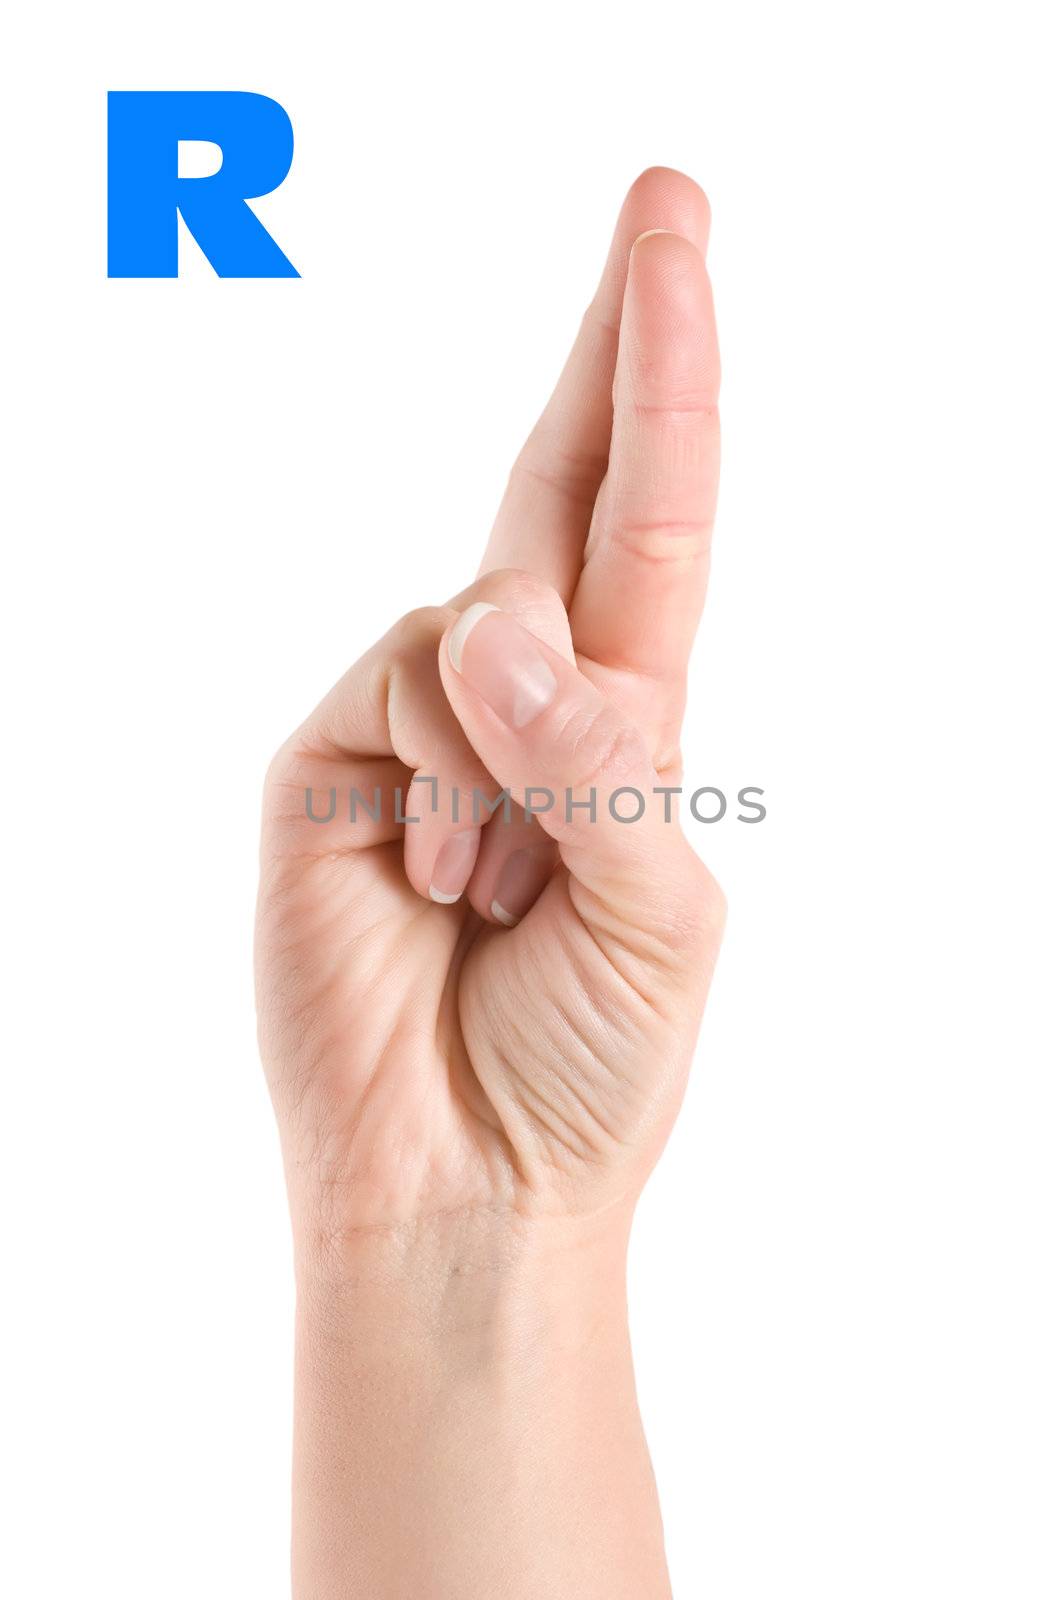 Finger Spelling the Alphabet in American Sign Language (ASL). The Letter R